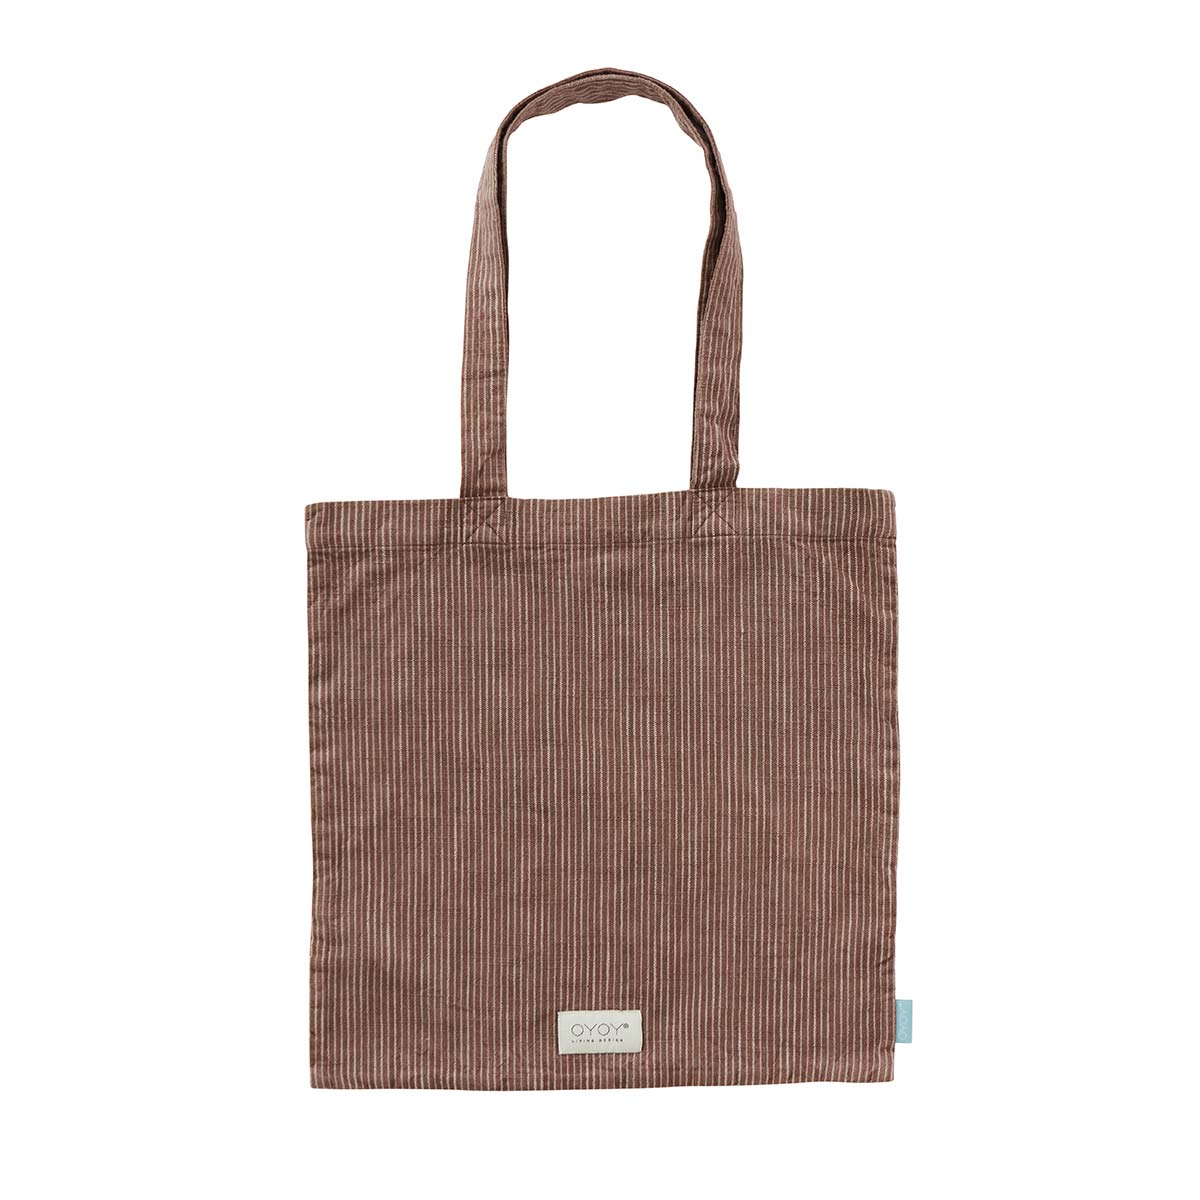 Tote Bag by OYOY